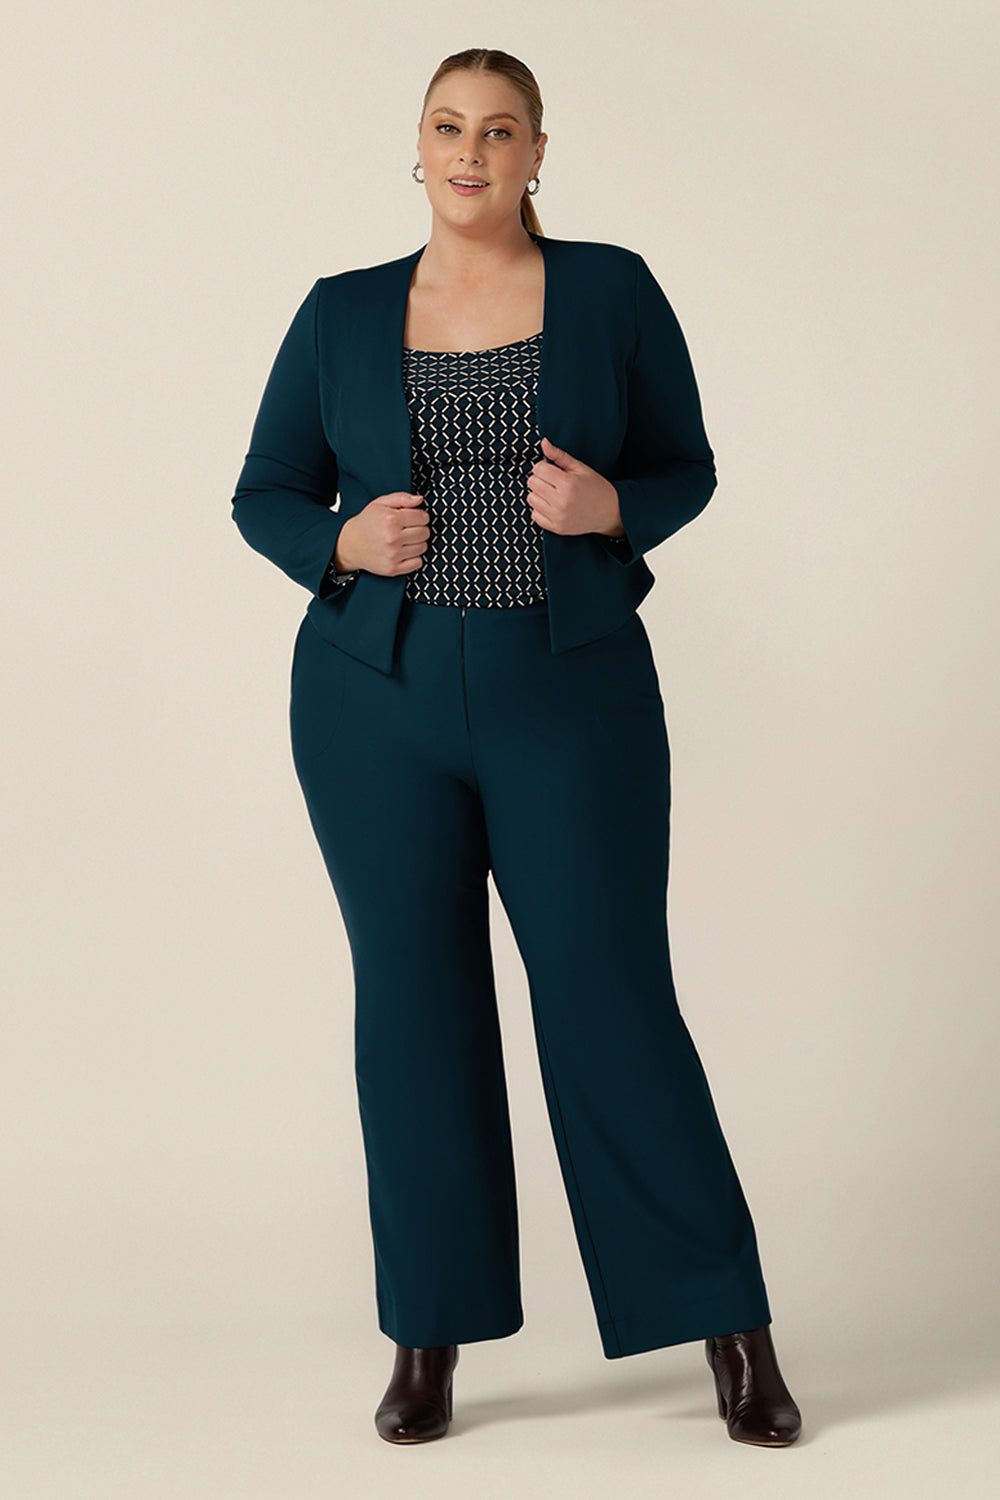 A plus size, size 18 woman wears a long sleeve top with squared scoop neckline. Worn with petrol blue, bootcut tailored pants and tailored blue work jacket, the geometric print jersey top is comfortable for corporate wear capsule wardrobes. Made in Australia, shop tops in sizes 8 to 24.